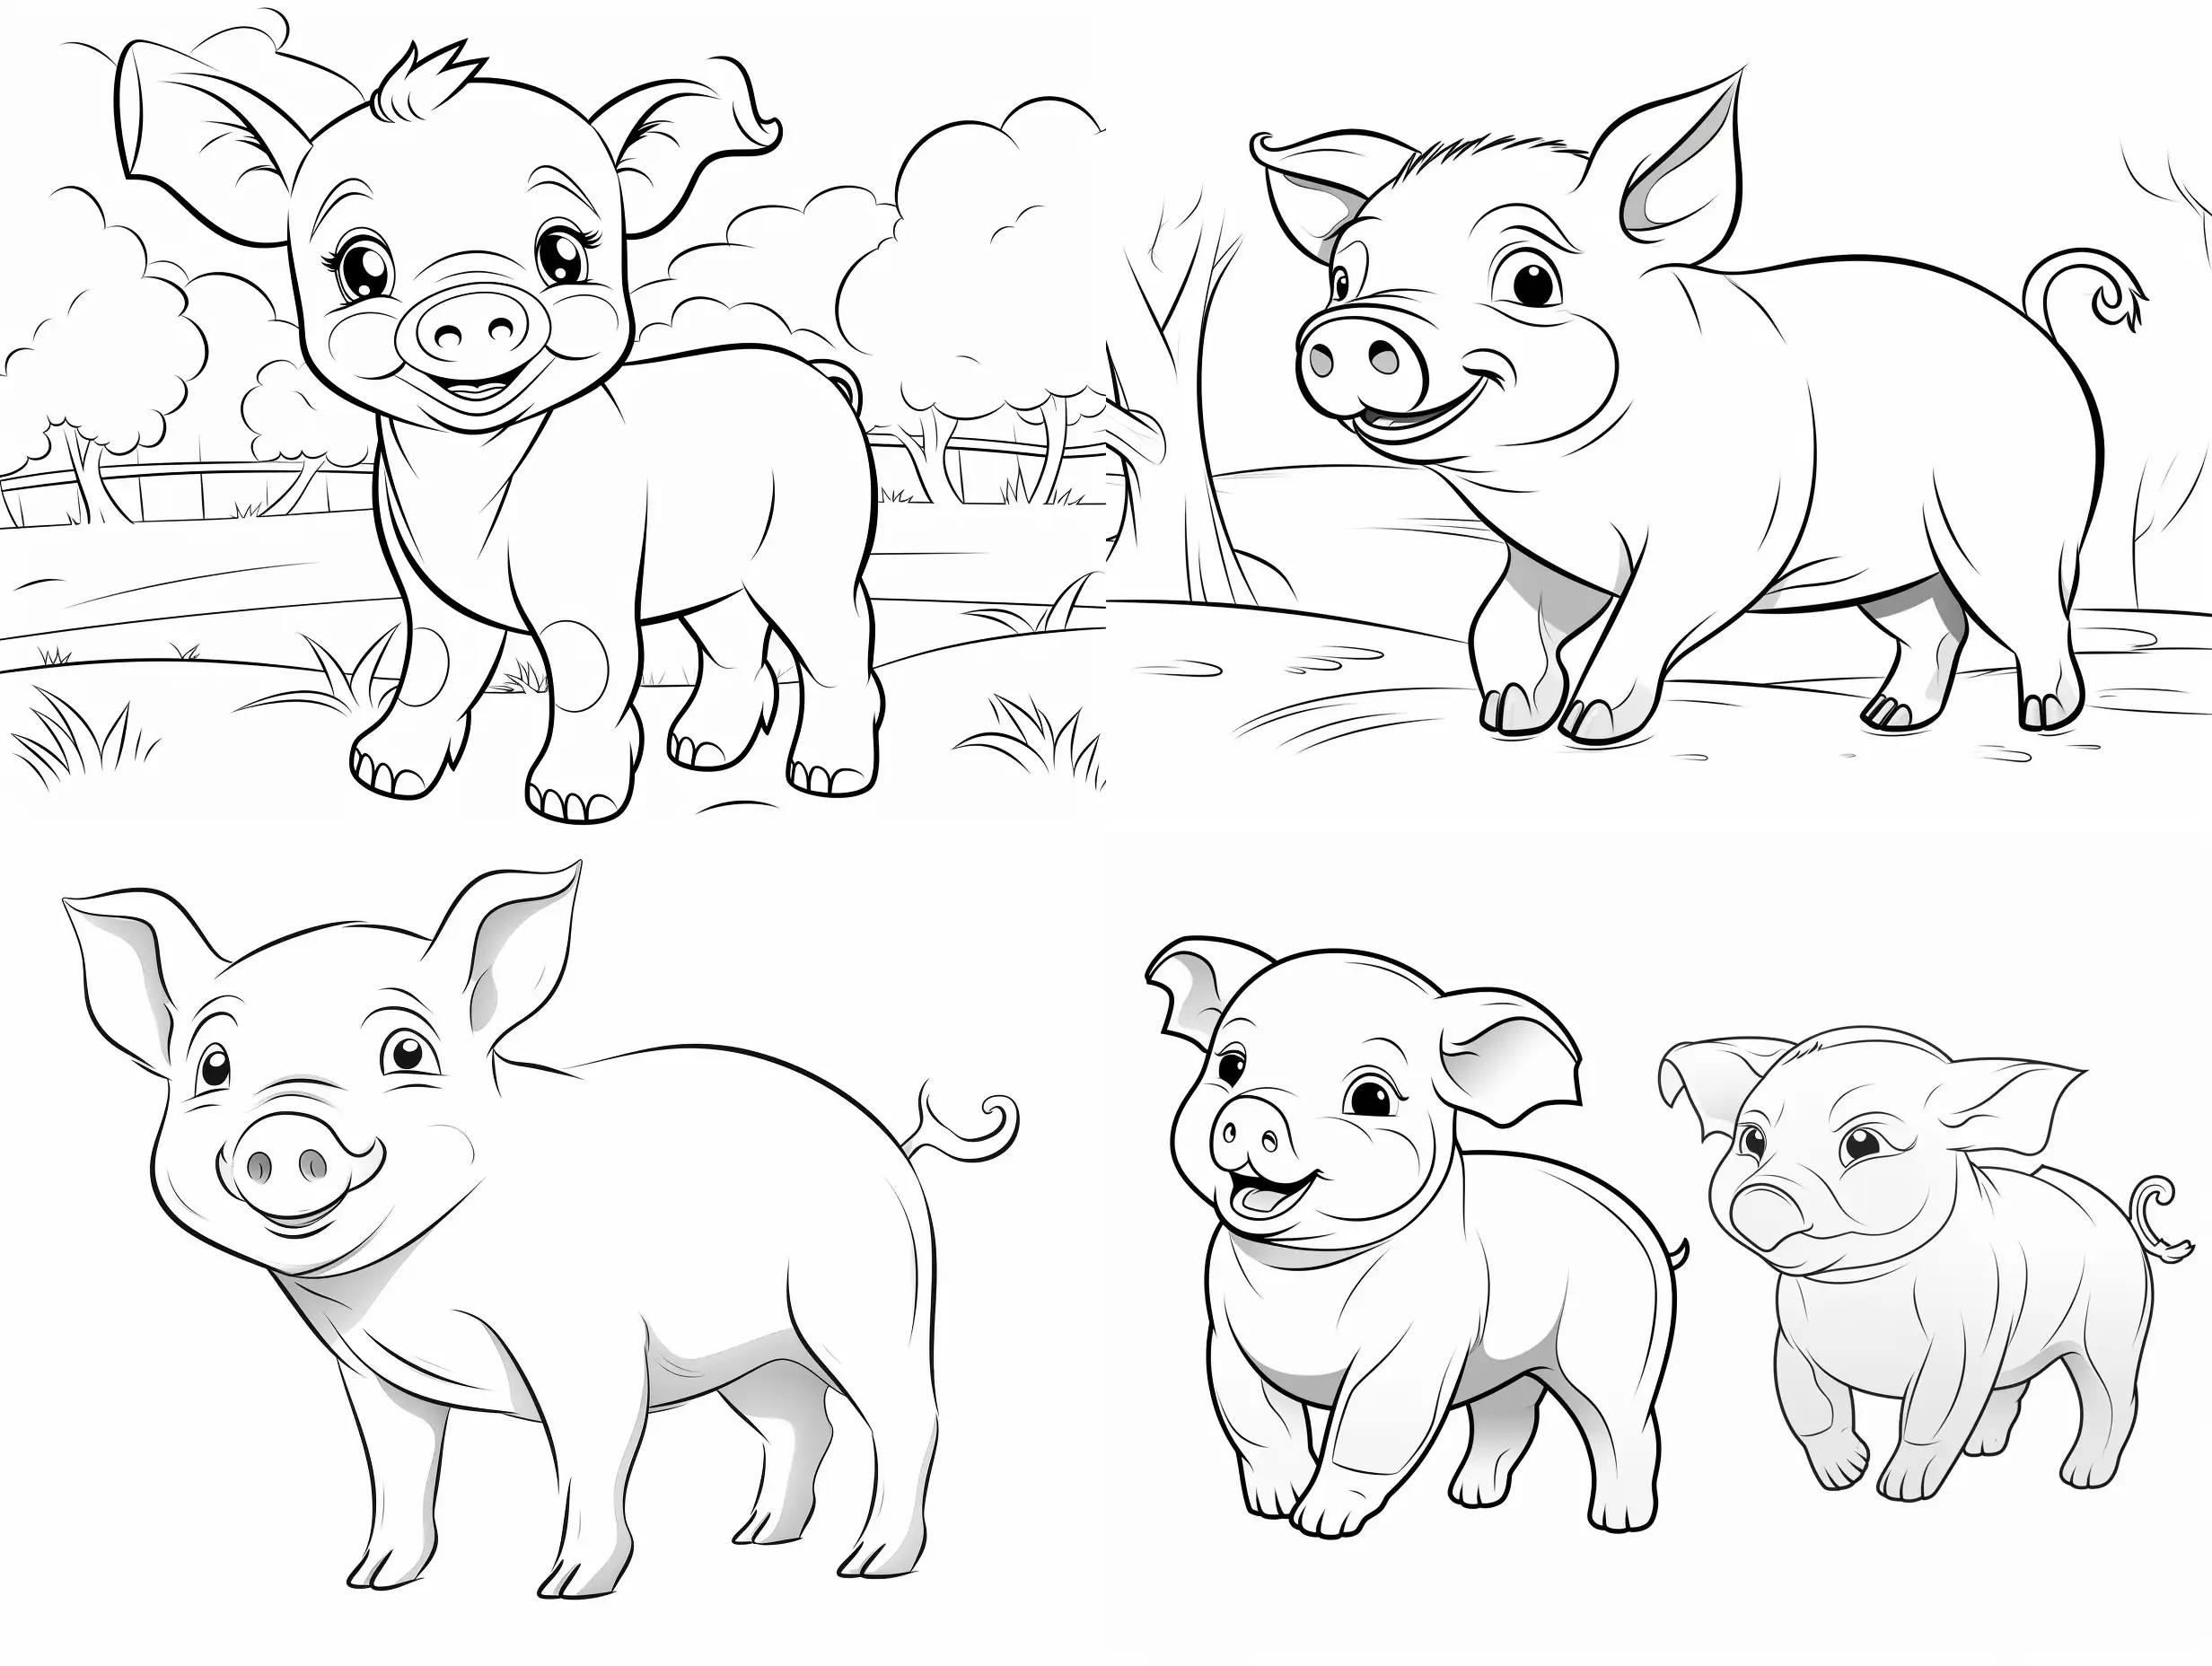 Adorable-Black-and-White-Contour-Pig-Coloring-Cartoon-for-Kids-Ages-14